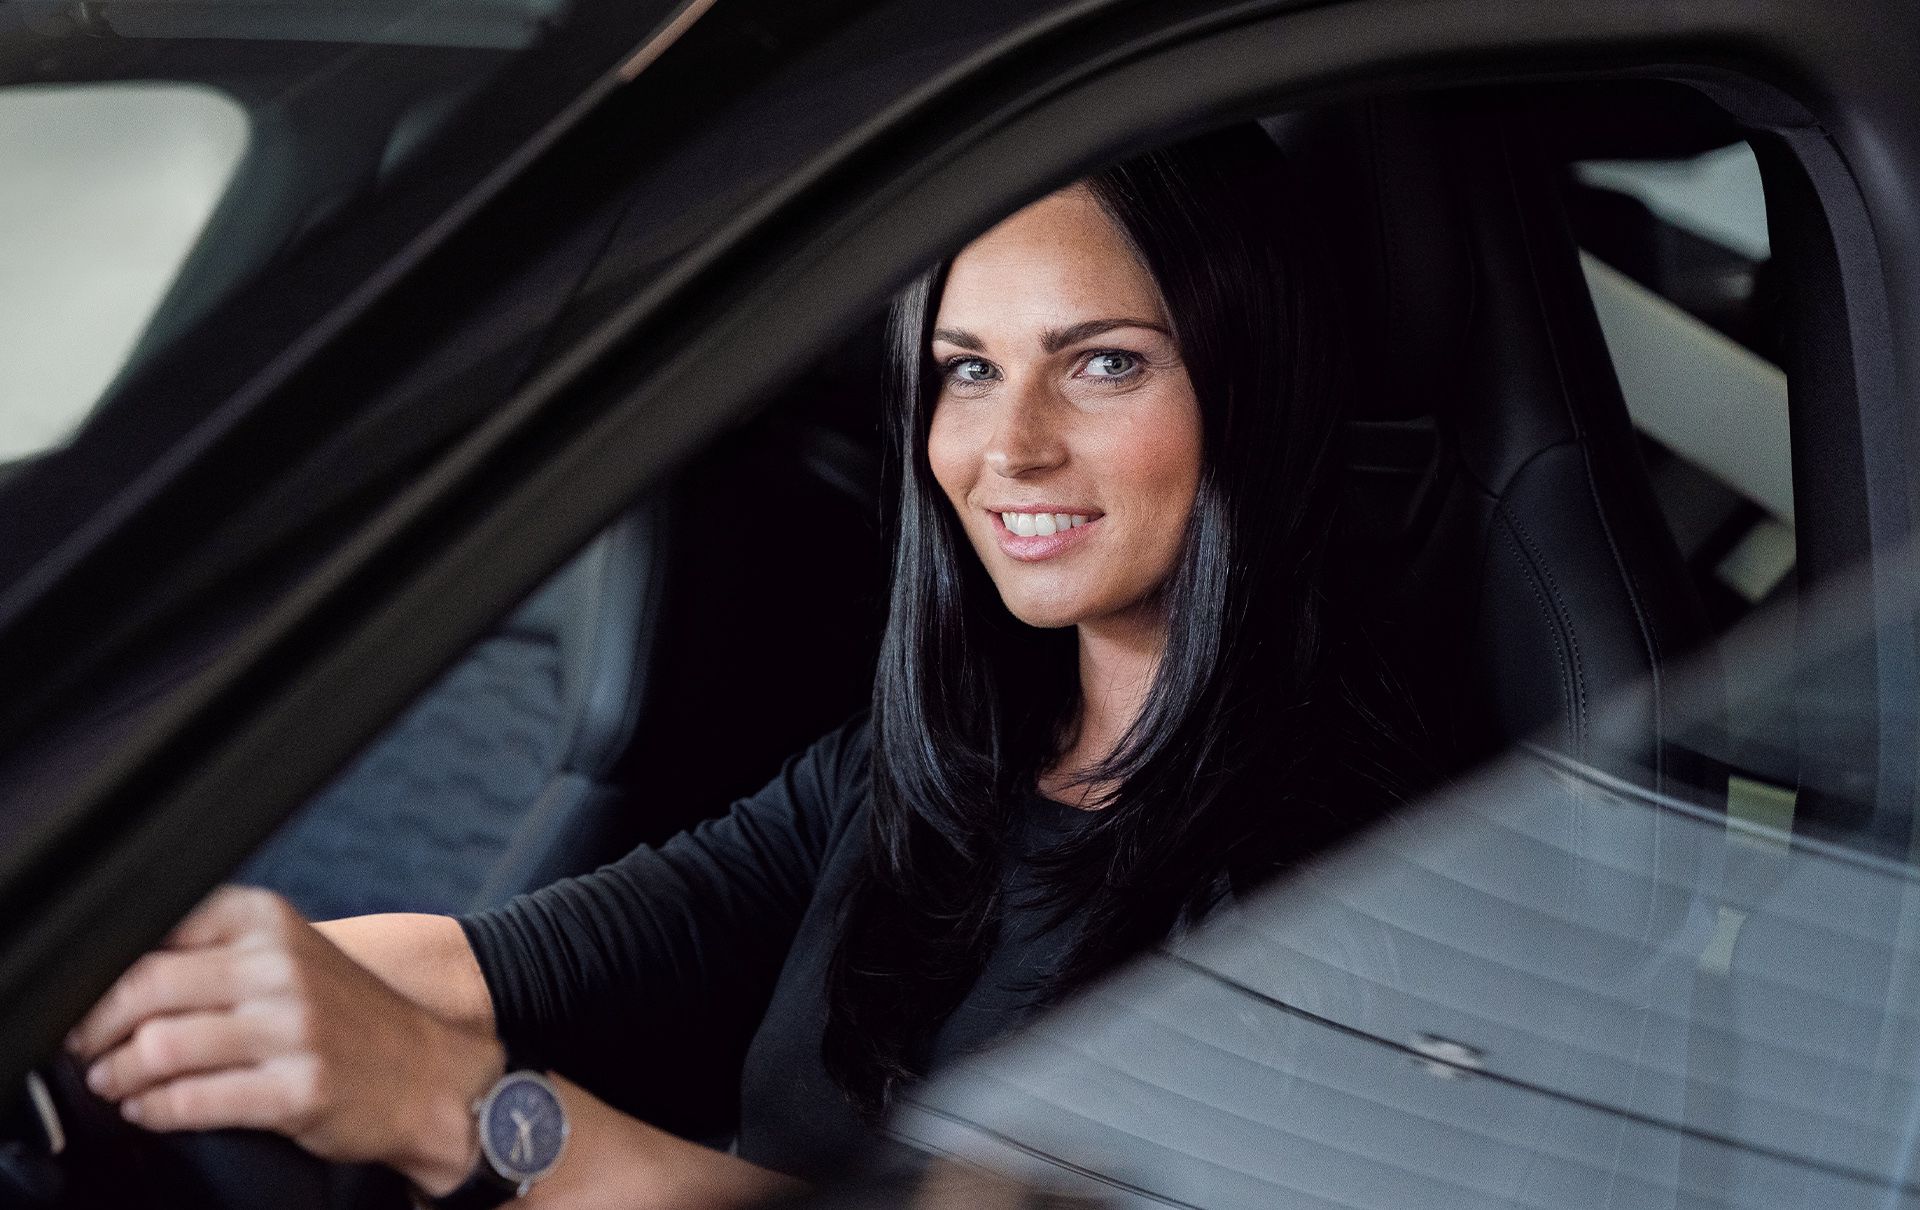 Anna Veith sits at the steering wheel in the Audi e-tron GT and looks into the camera.